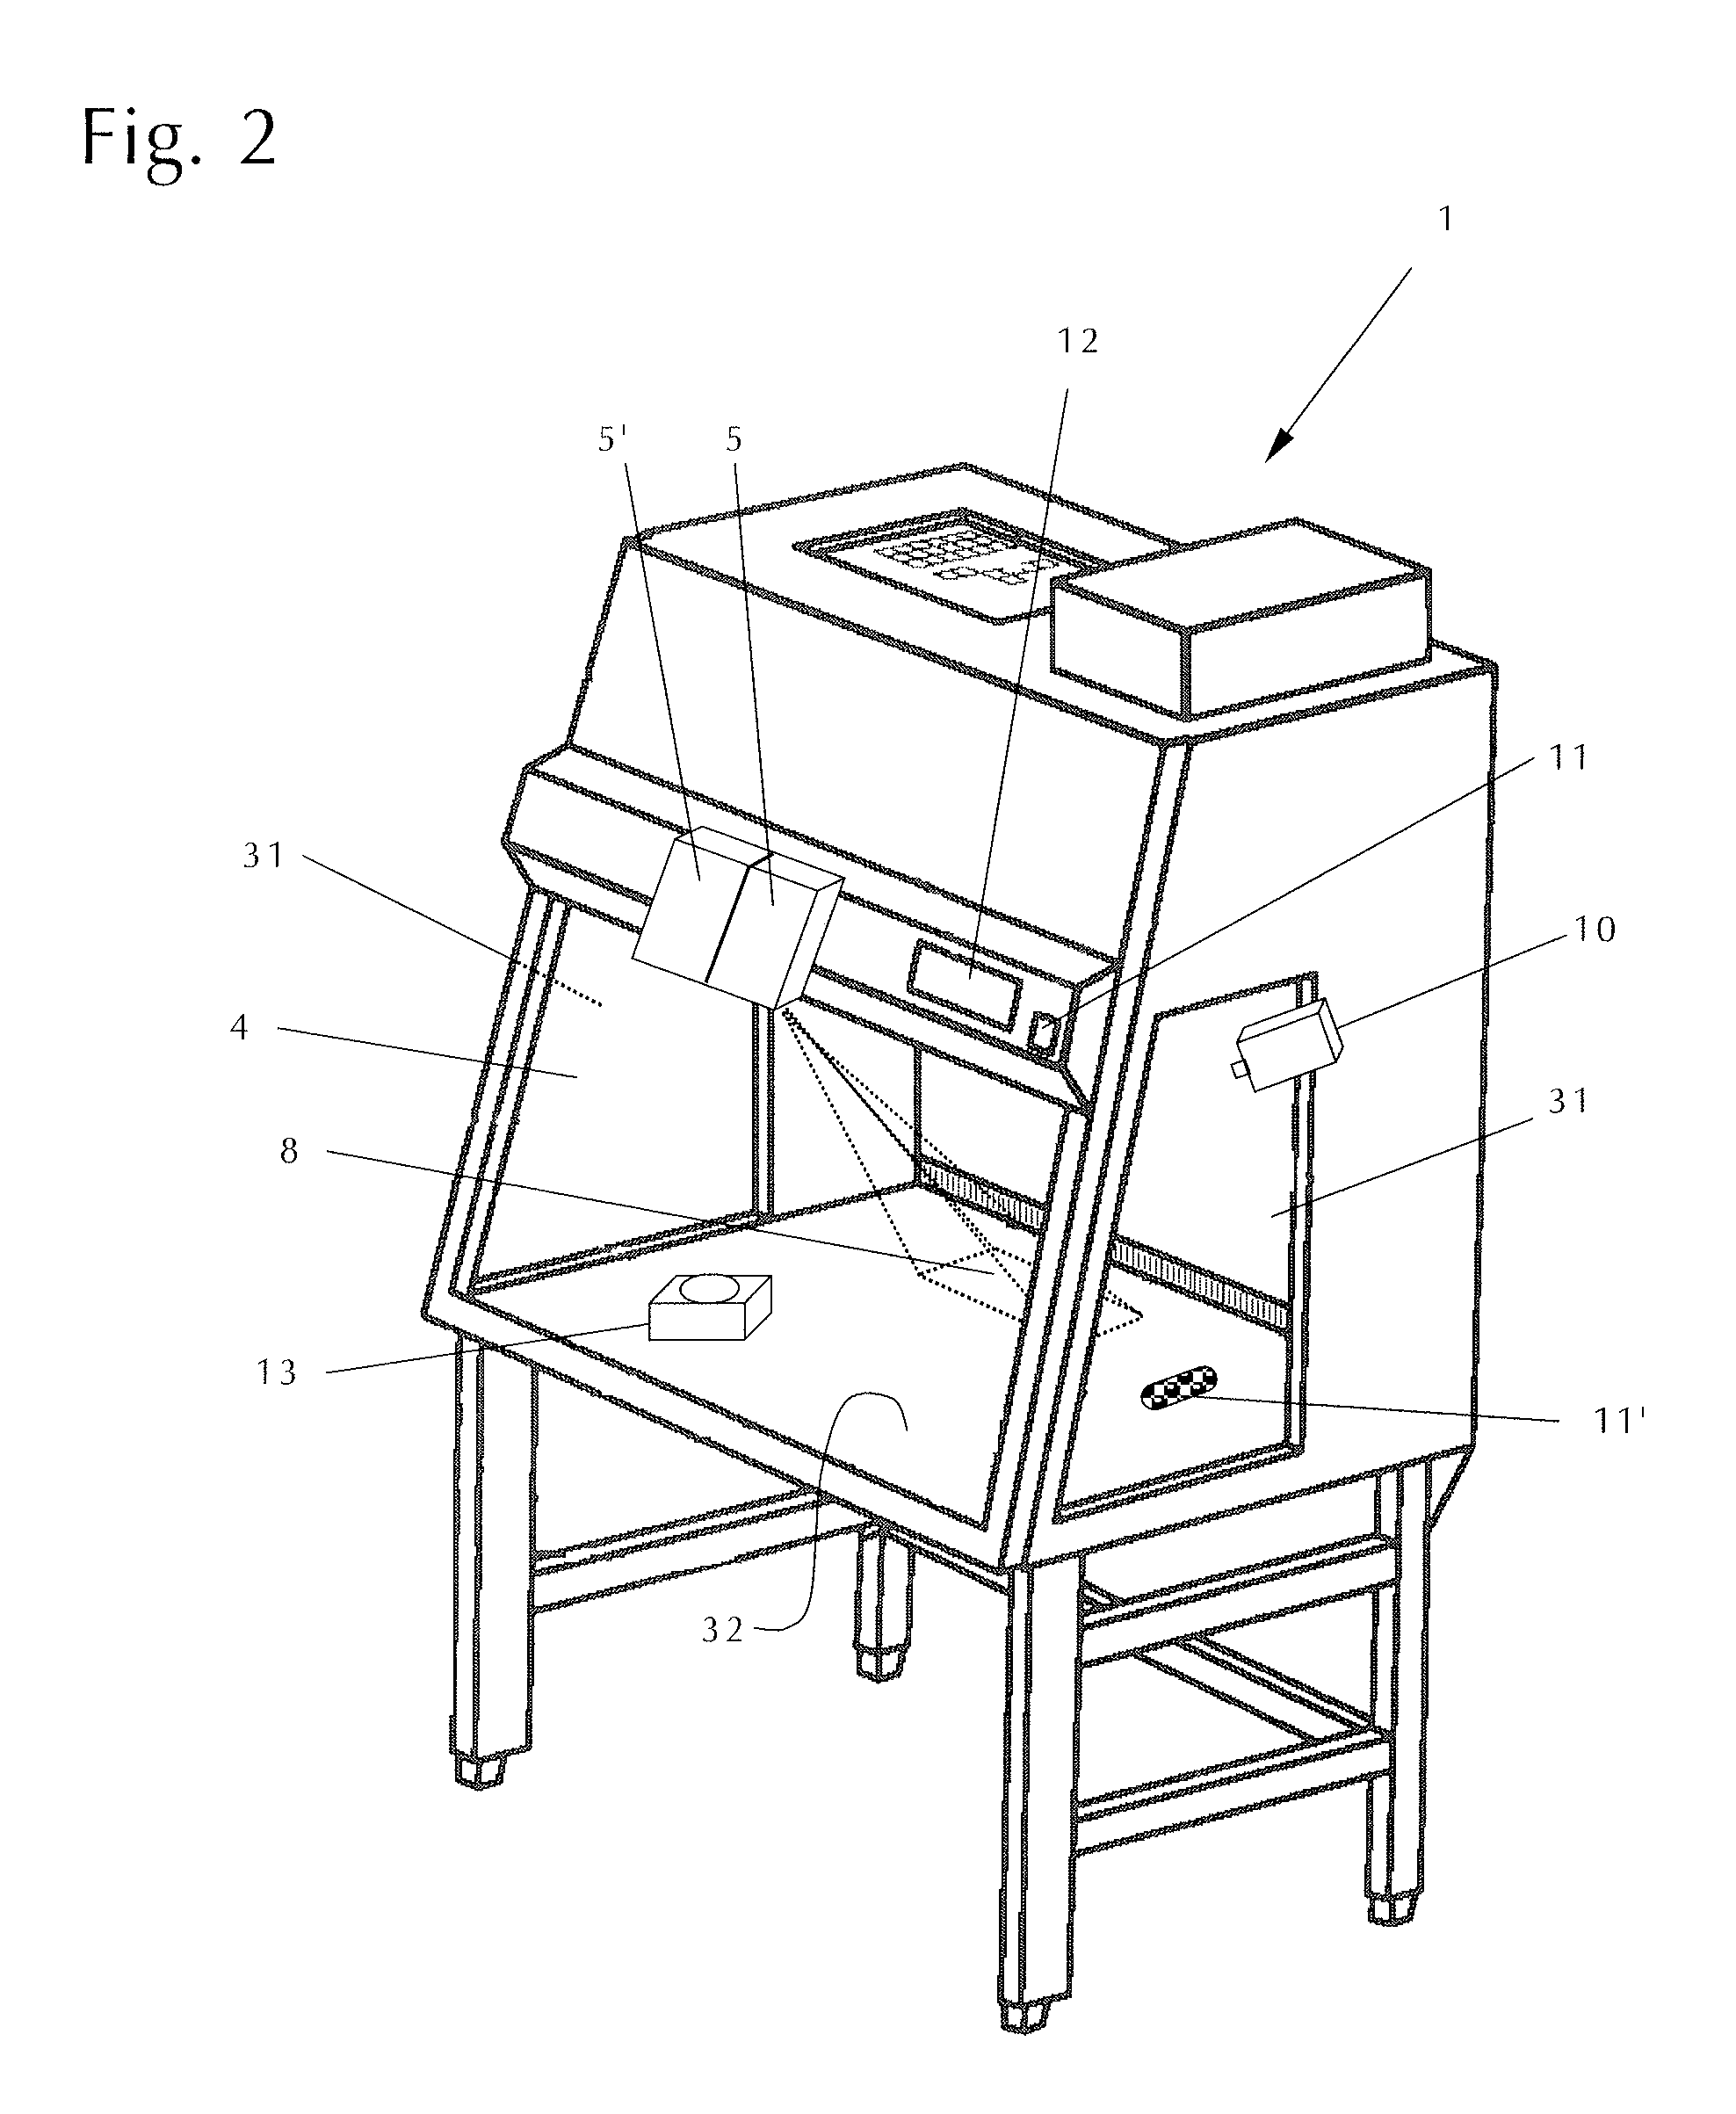 Laboratory Fume Hood With A Projection Apparatus